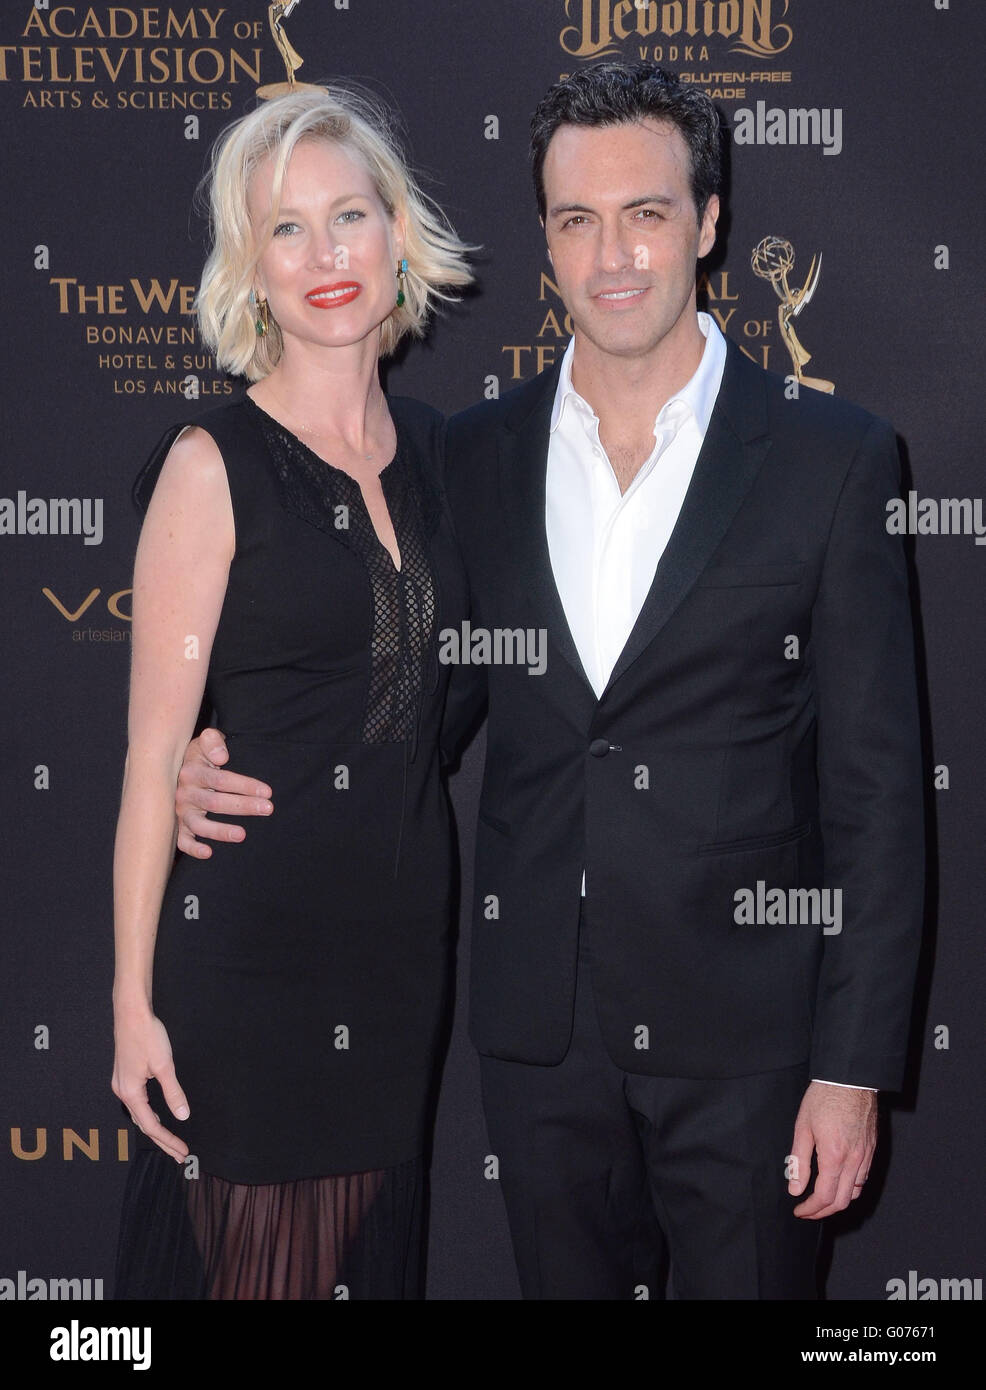 Los Angeles, CA, USA. 29th Apr, 2016. 29 April 2016 - Los Angeles, California - Reid Scott. Arrivals for the 43rd Annual Daytime Creative Arts Emmy Awards held at the Westin Bonaventure Hotel and Suites Photo Credit: Birdie Thompson/AdMedia Credit:  Birdie Thompson/AdMedia/ZUMA Wire/Alamy Live News Stock Photo